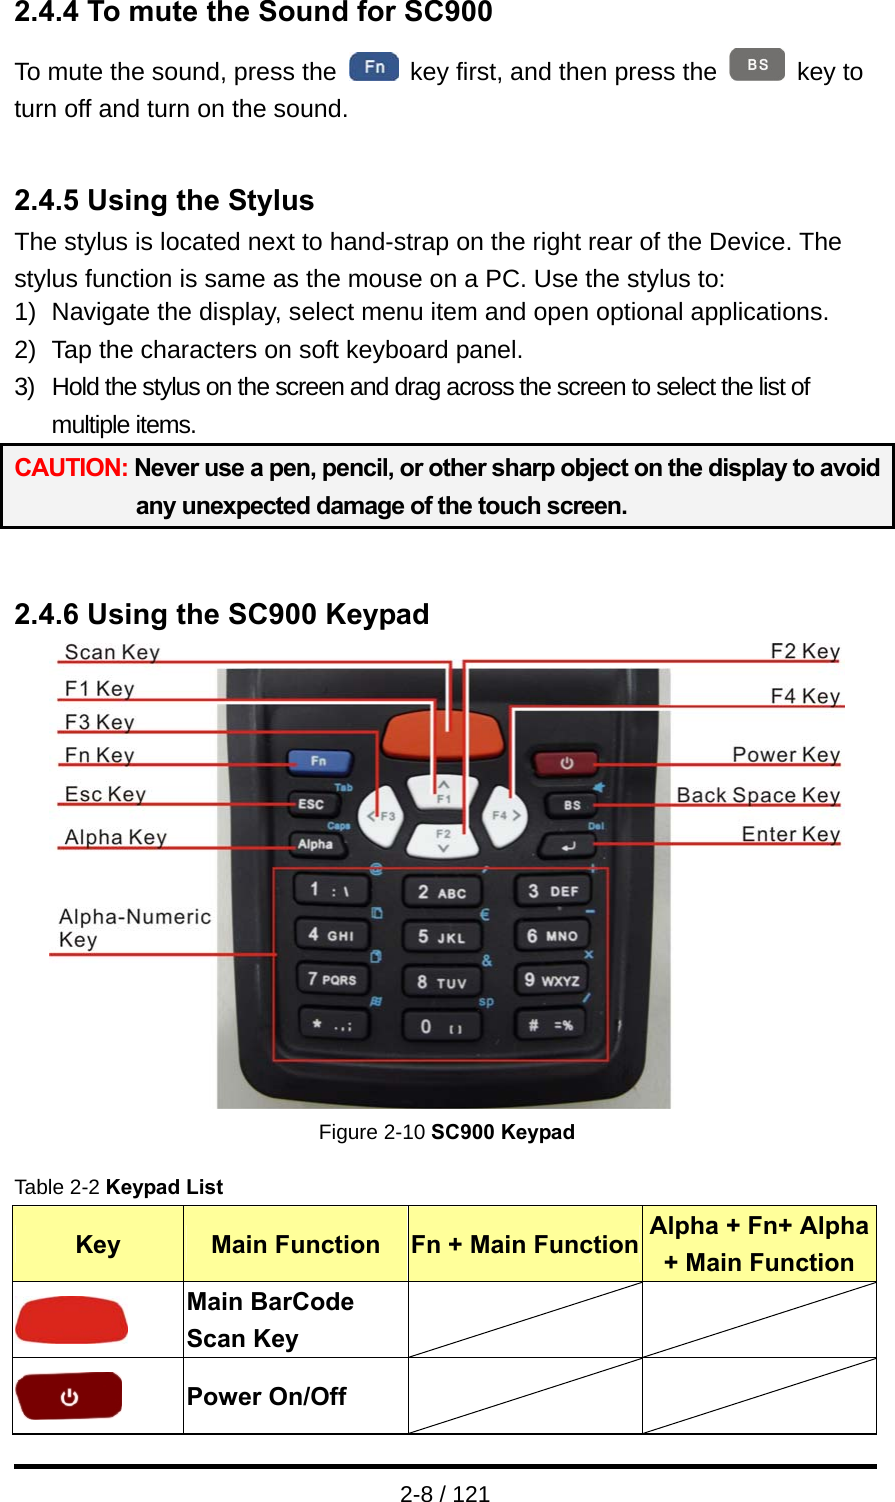  2-8 / 121 2.4.4 To mute the Sound for SC900 To mute the sound, press the    key first, and then press the   key to turn off and turn on the sound.   2.4.5 Using the Stylus The stylus is located next to hand-strap on the right rear of the Device. The stylus function is same as the mouse on a PC. Use the stylus to: 1)  Navigate the display, select menu item and open optional applications. 2)  Tap the characters on soft keyboard panel. 3)  Hold the stylus on the screen and drag across the screen to select the list of multiple items. CAUTION: Never use a pen, pencil, or other sharp object on the display to avoid any unexpected damage of the touch screen.   2.4.6 Using the SC900 Keypad  Figure 2-10 SC900 Keypad  Table 2-2 Keypad List Key  Main Function  Fn + Main Function Alpha + Fn+ Alpha + Main Function  Main BarCode Scan Key     Power On/Off     